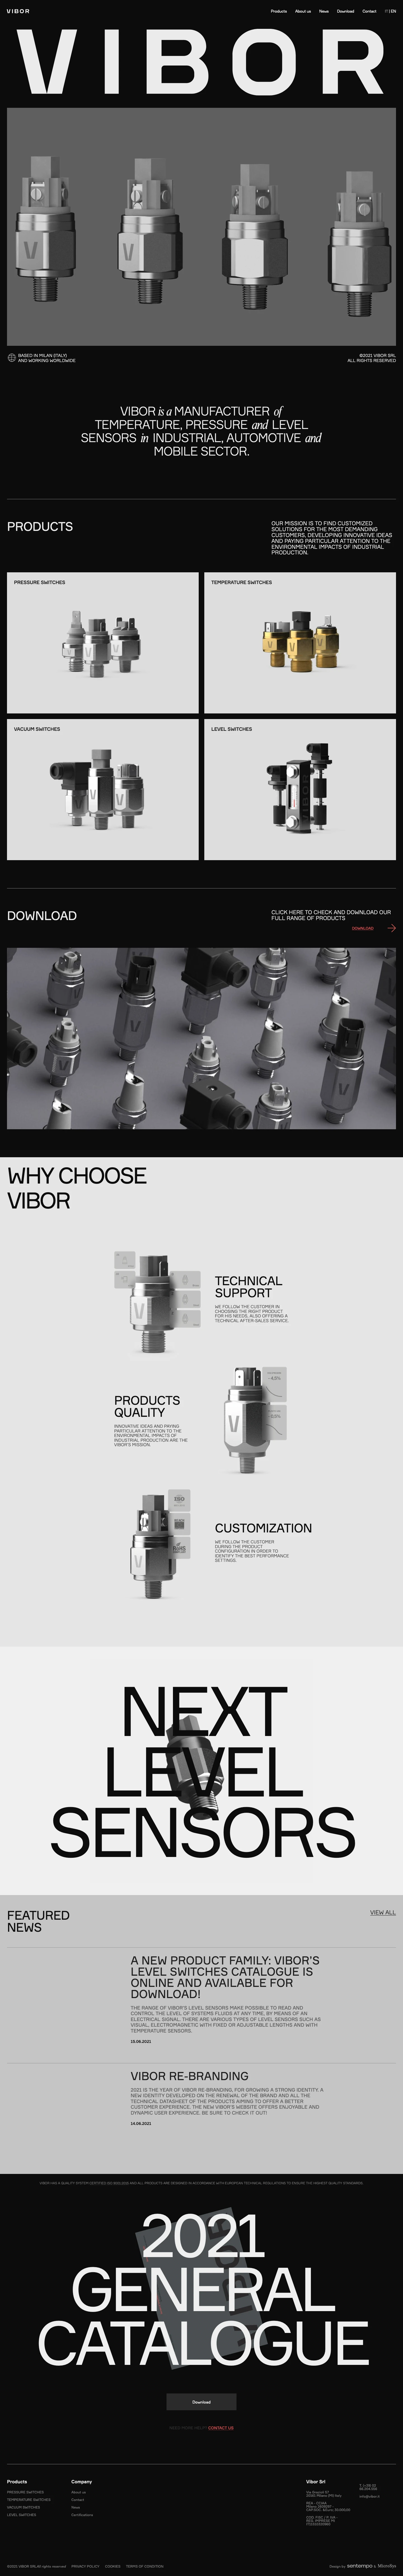 Vibor Landing Page Example: Vibor is  a manufacturer of temperature, pressure and level sensors in industrial, automotive and mobile sector.